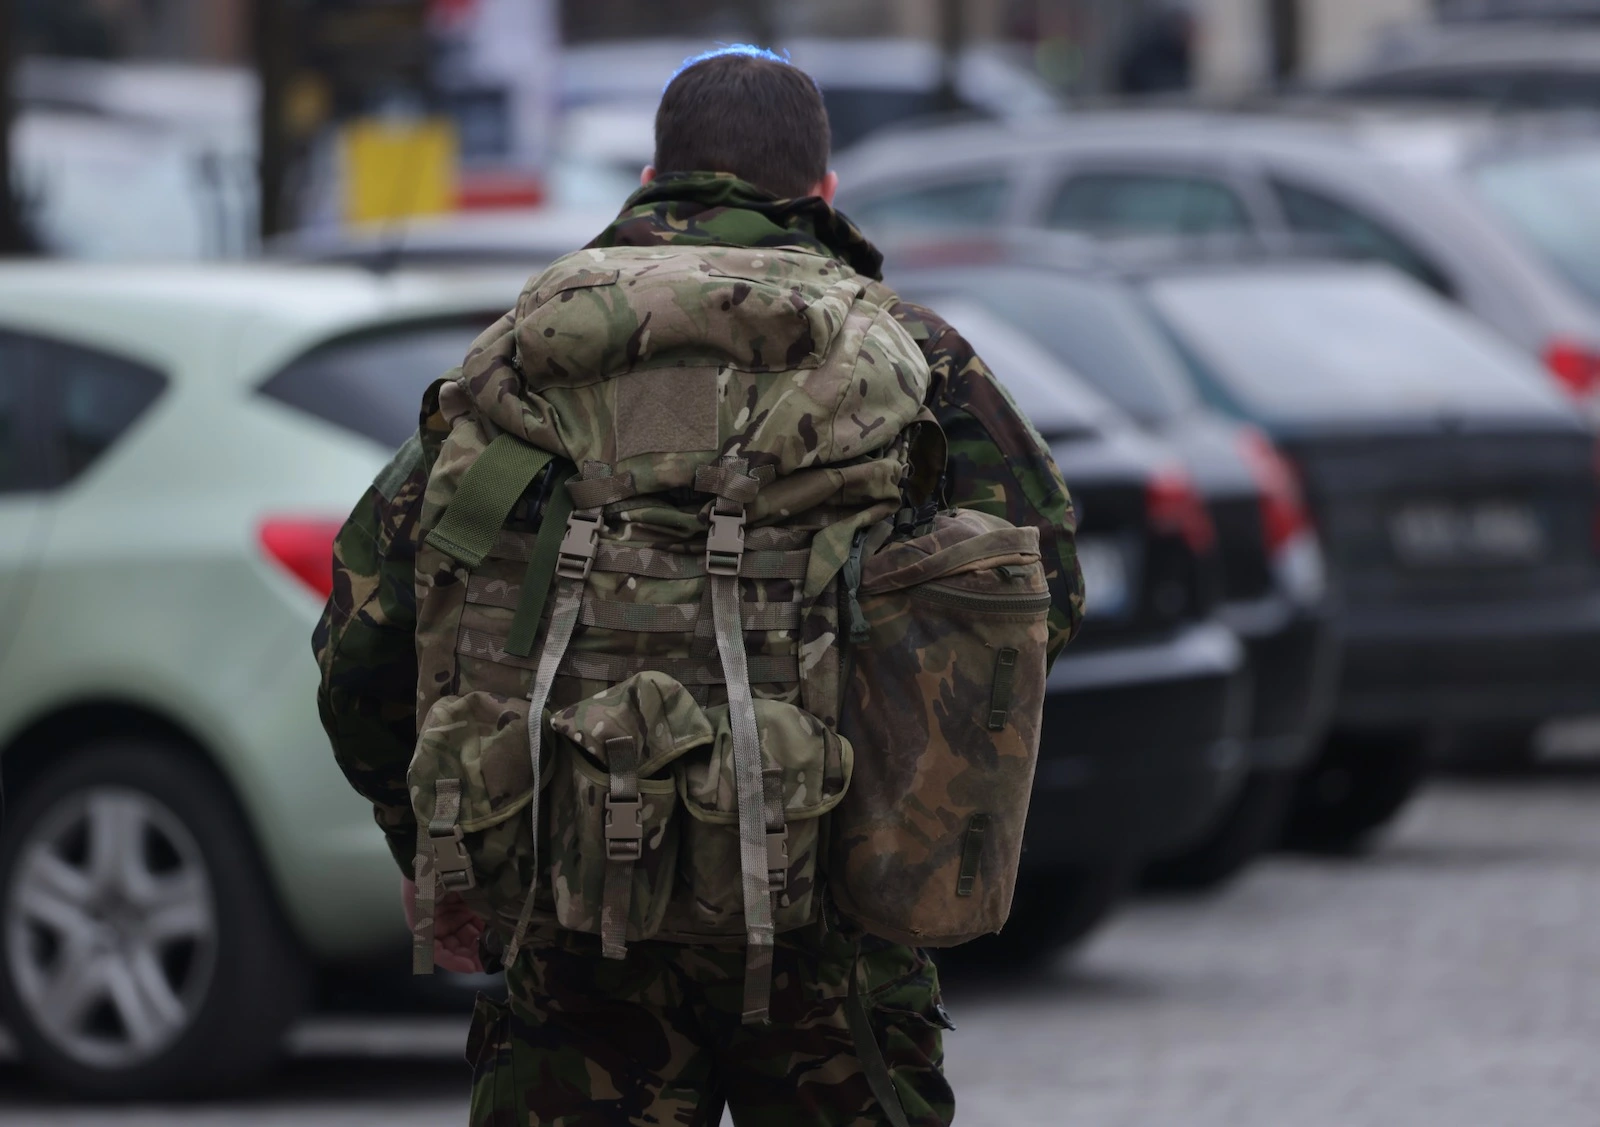 Why Ukraine is really interested in foreign fighters